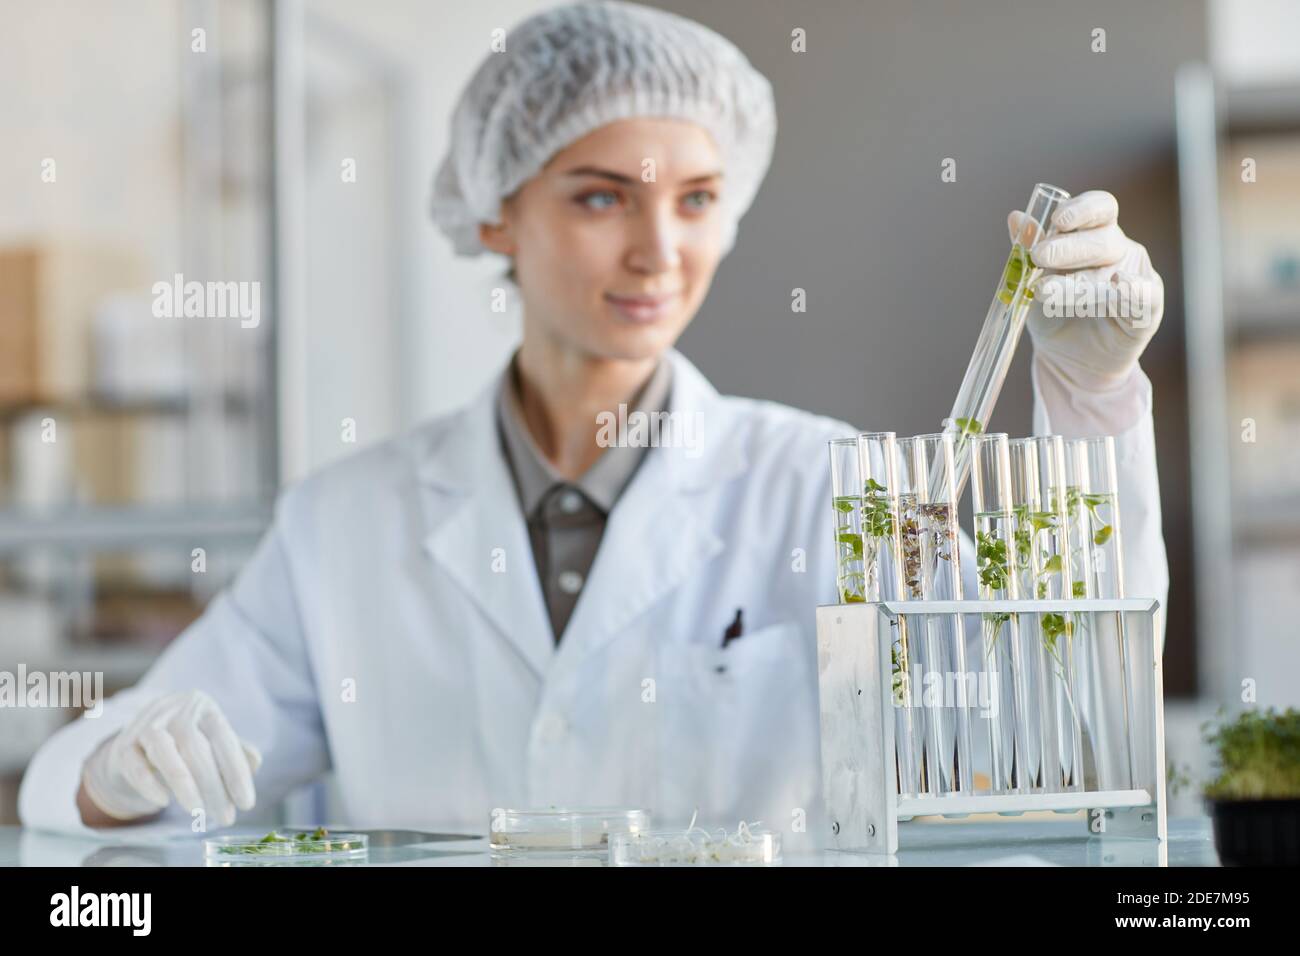 Portrait of young female scientist holding test tube with plant samples while working on research in biotechnology lab, copy space Stock Photo